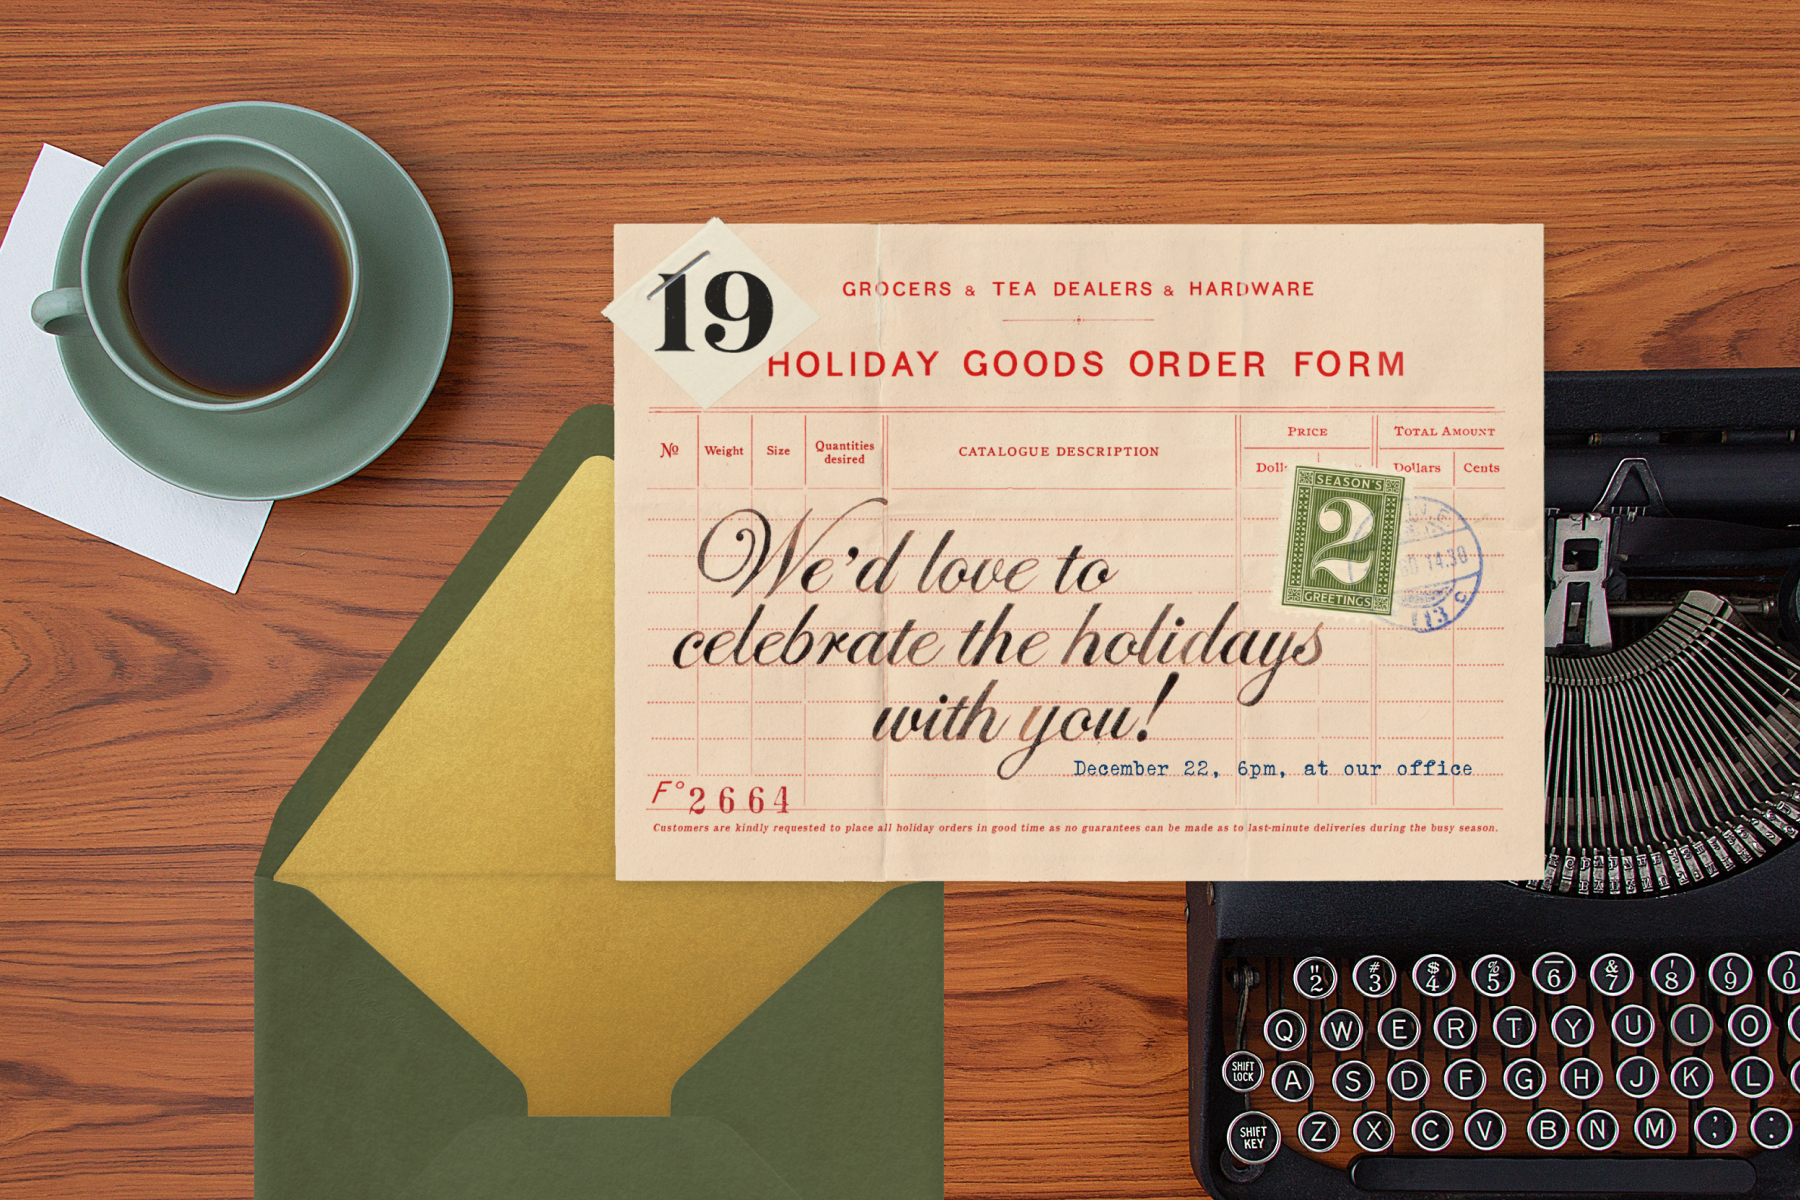 A cream colored invitation with red text in the style of a vintage order form with cursive black text inviting you to celebrate the holidays. A green colored envelope with a gold liner sits behind it.